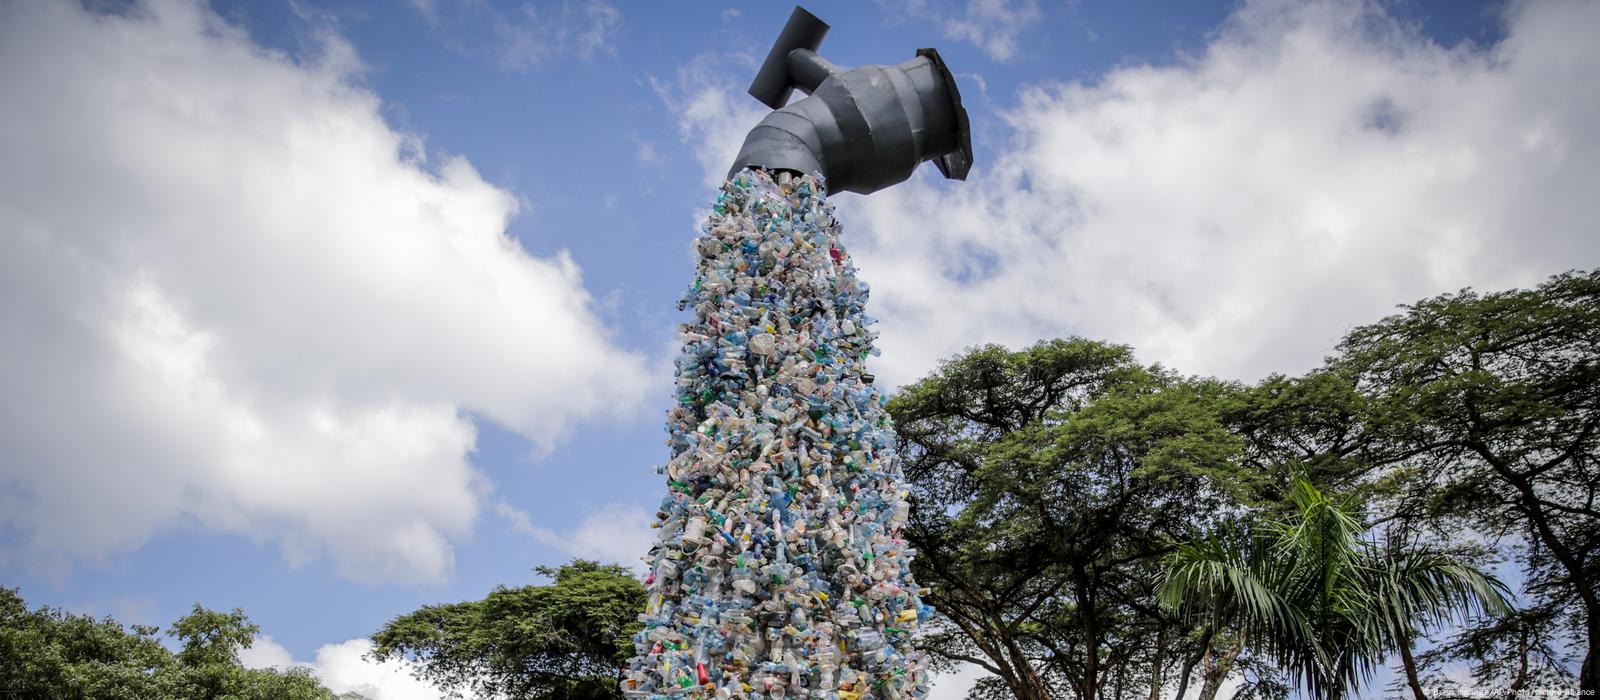 Turning off the Tap: How the world can end plastic pollution and